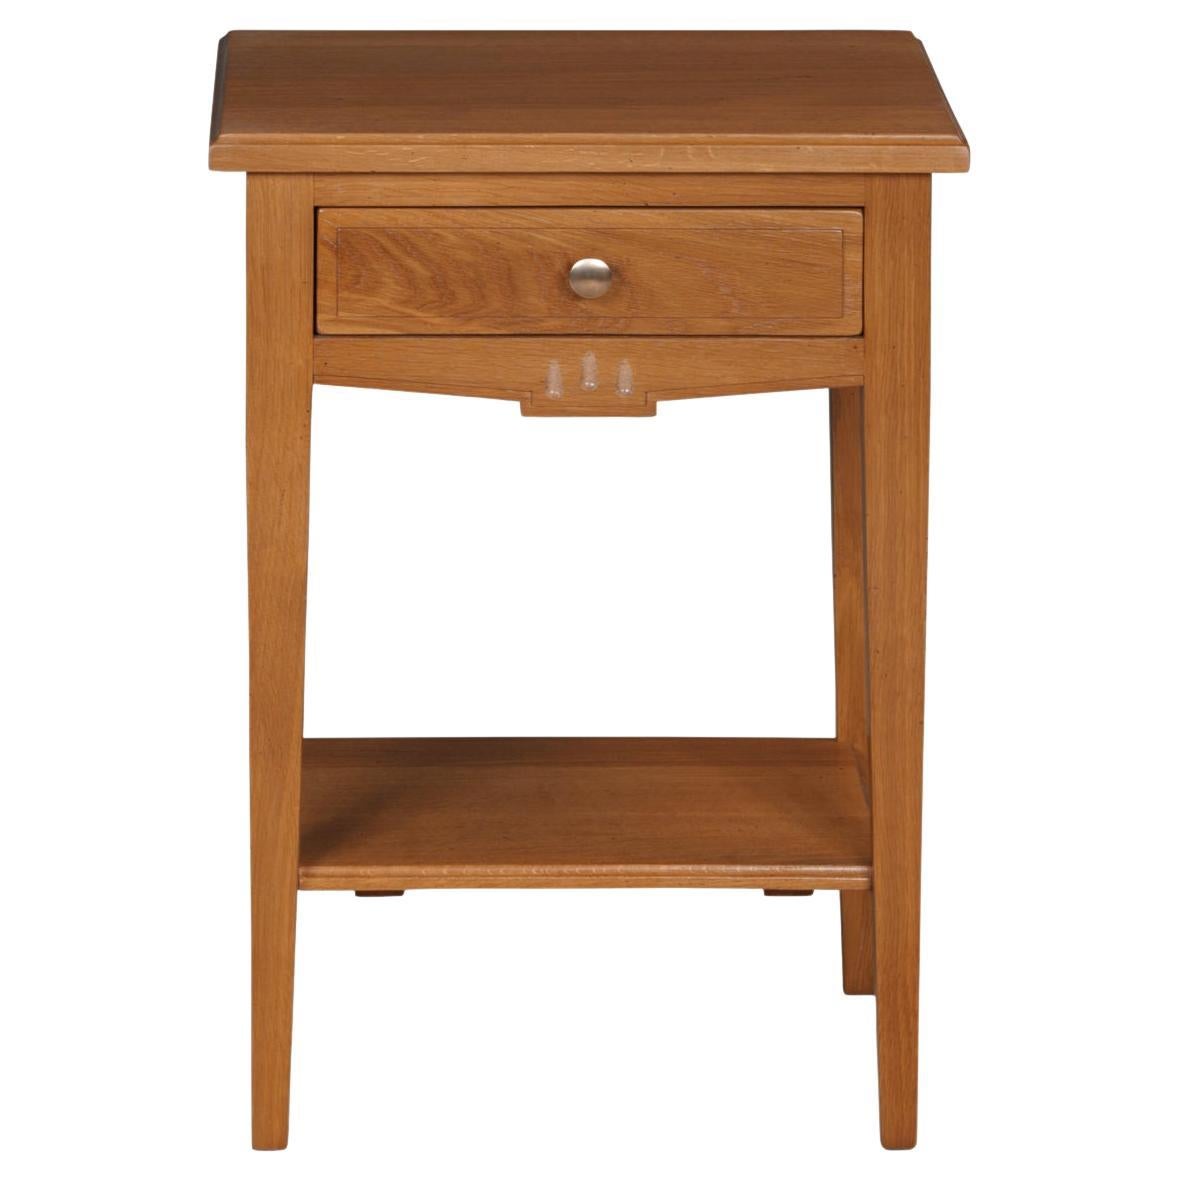 French Neo Classical Style Bedside Table in Solid Oak, 1 Drawer For Sale